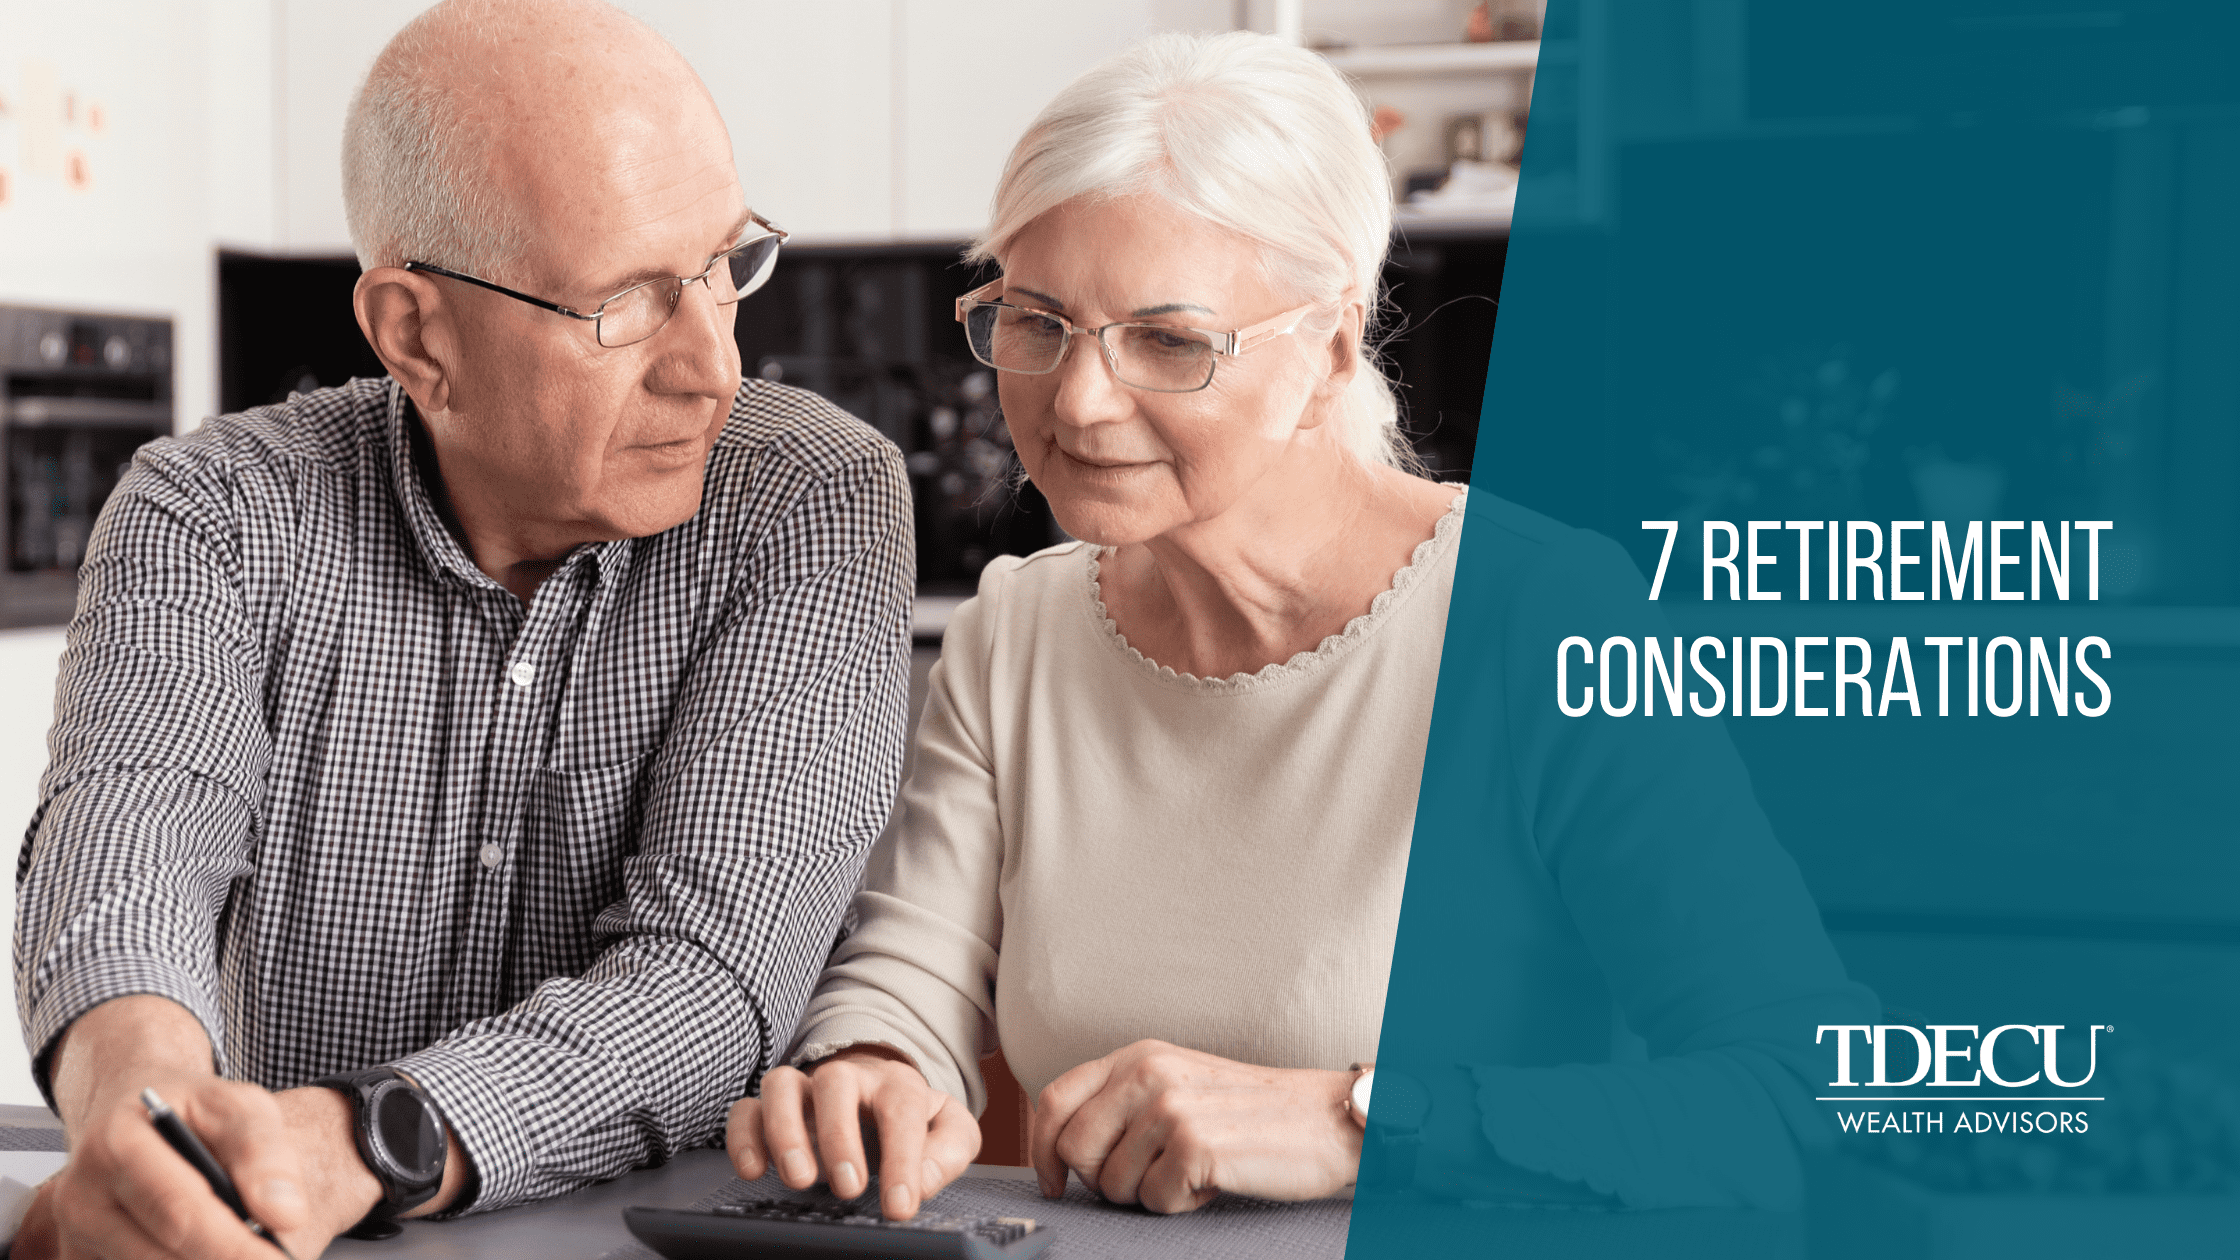 7 Retirement Considerations: Thoughts from a financial professional